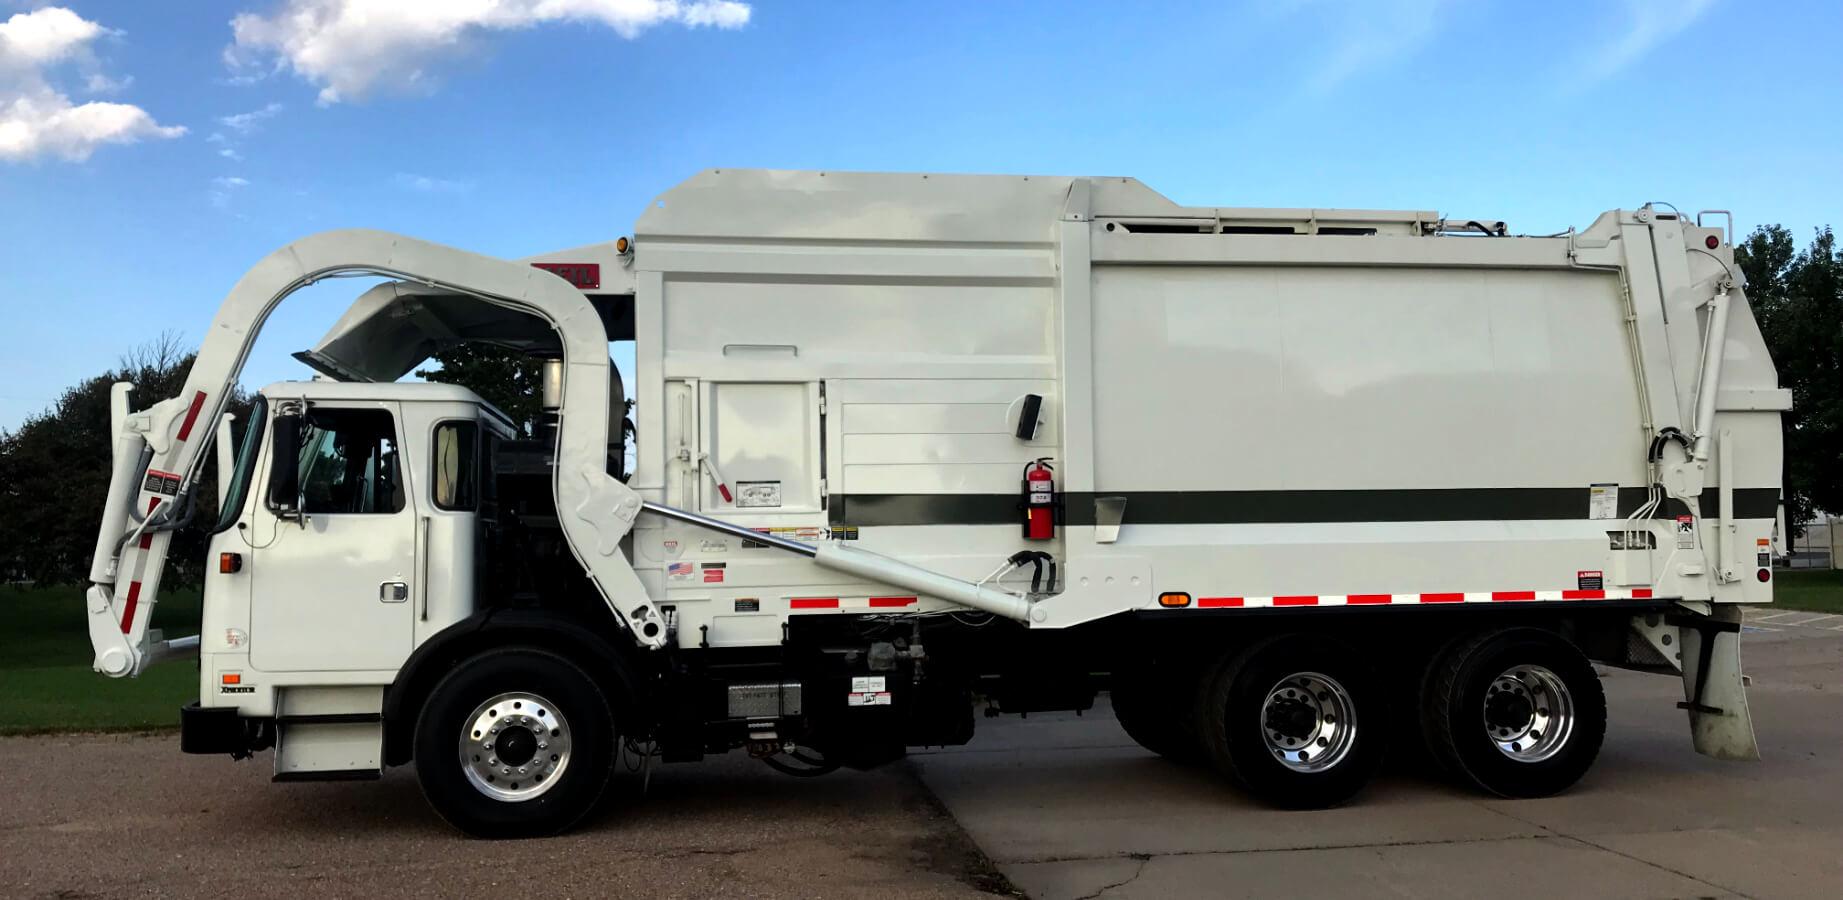 Side view of a frontload waste truck